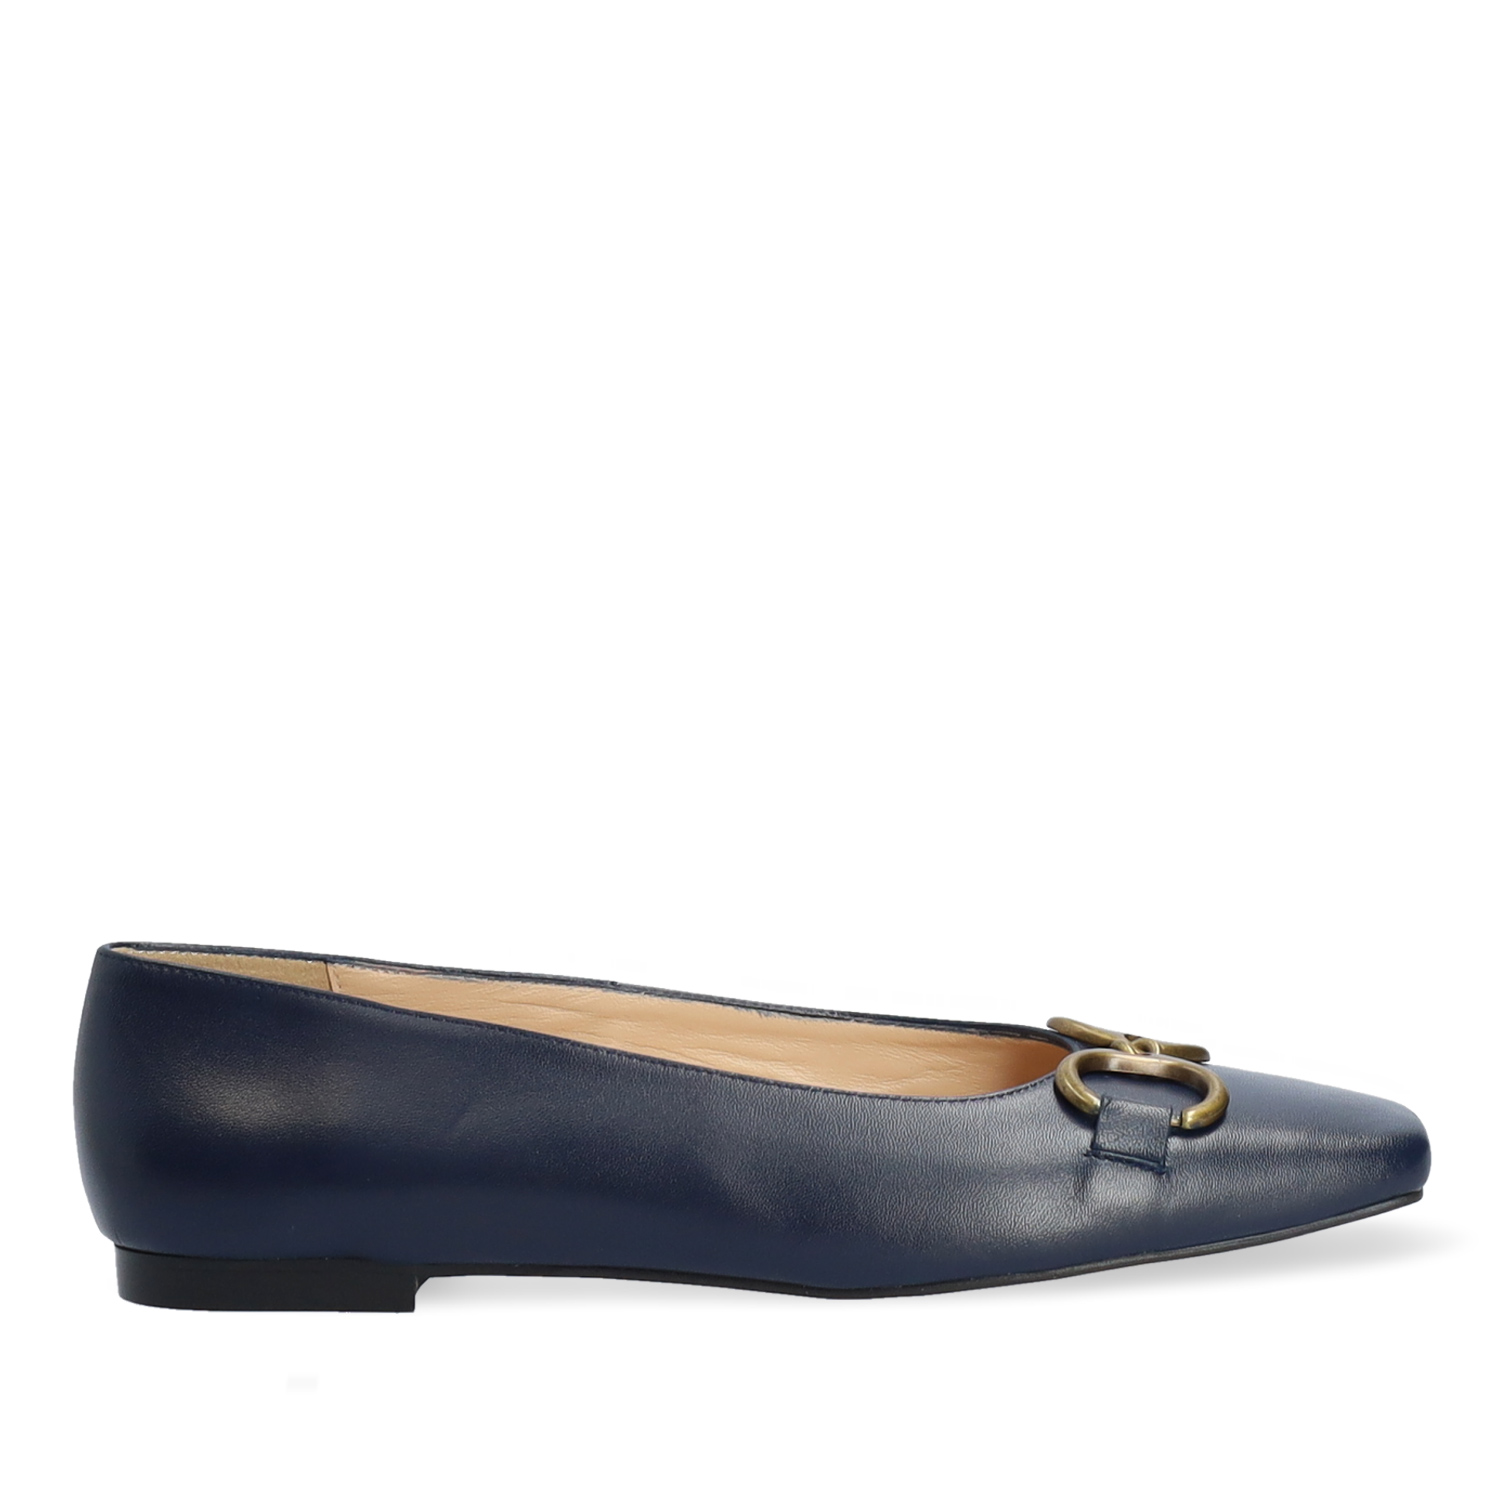 Square toe ballerina flats in navy leather - Women, Flat Shoes ...